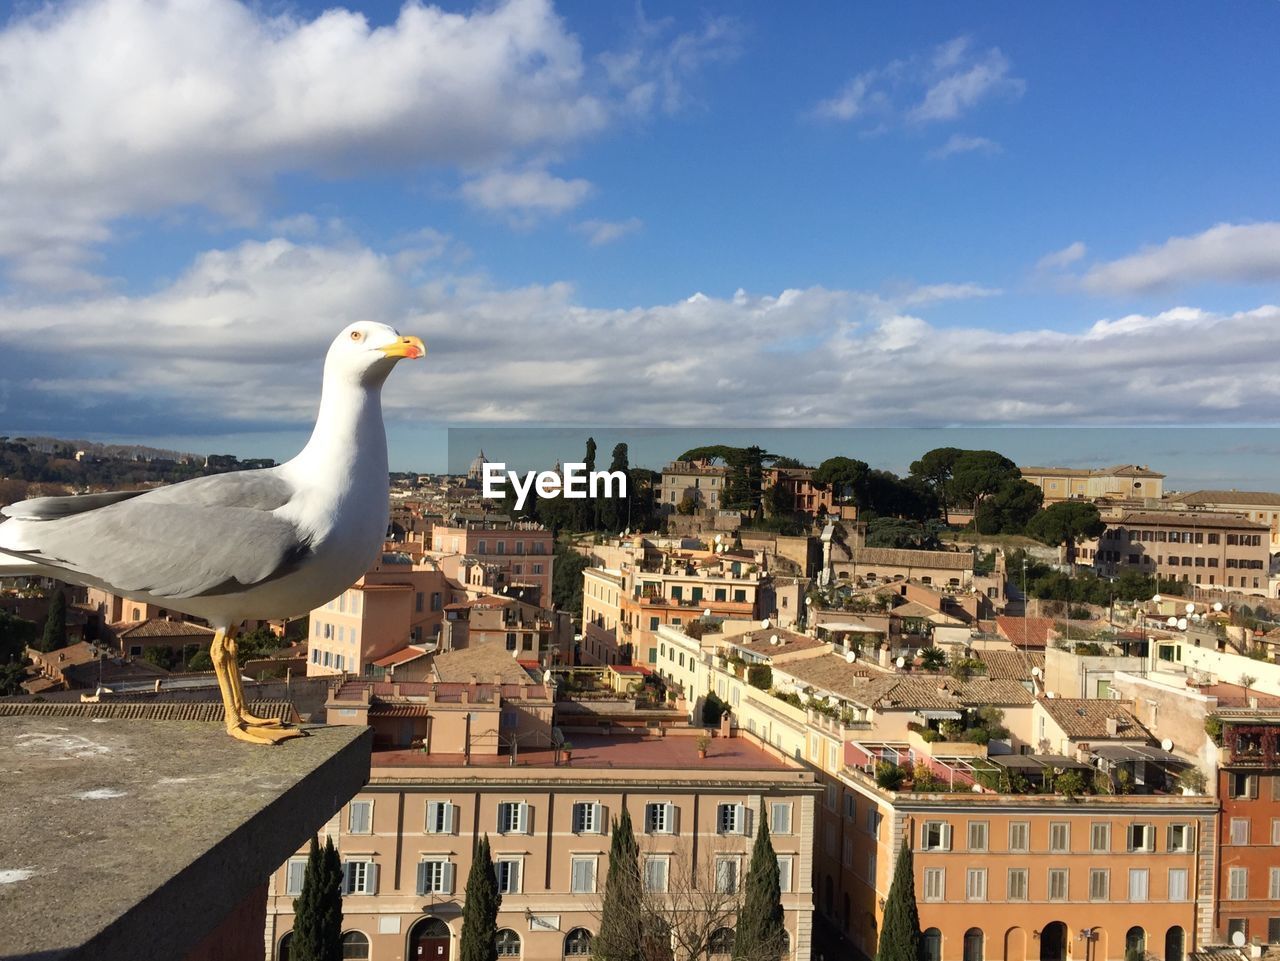 SEAGULL FLYING OVER BUILDINGS IN CITY